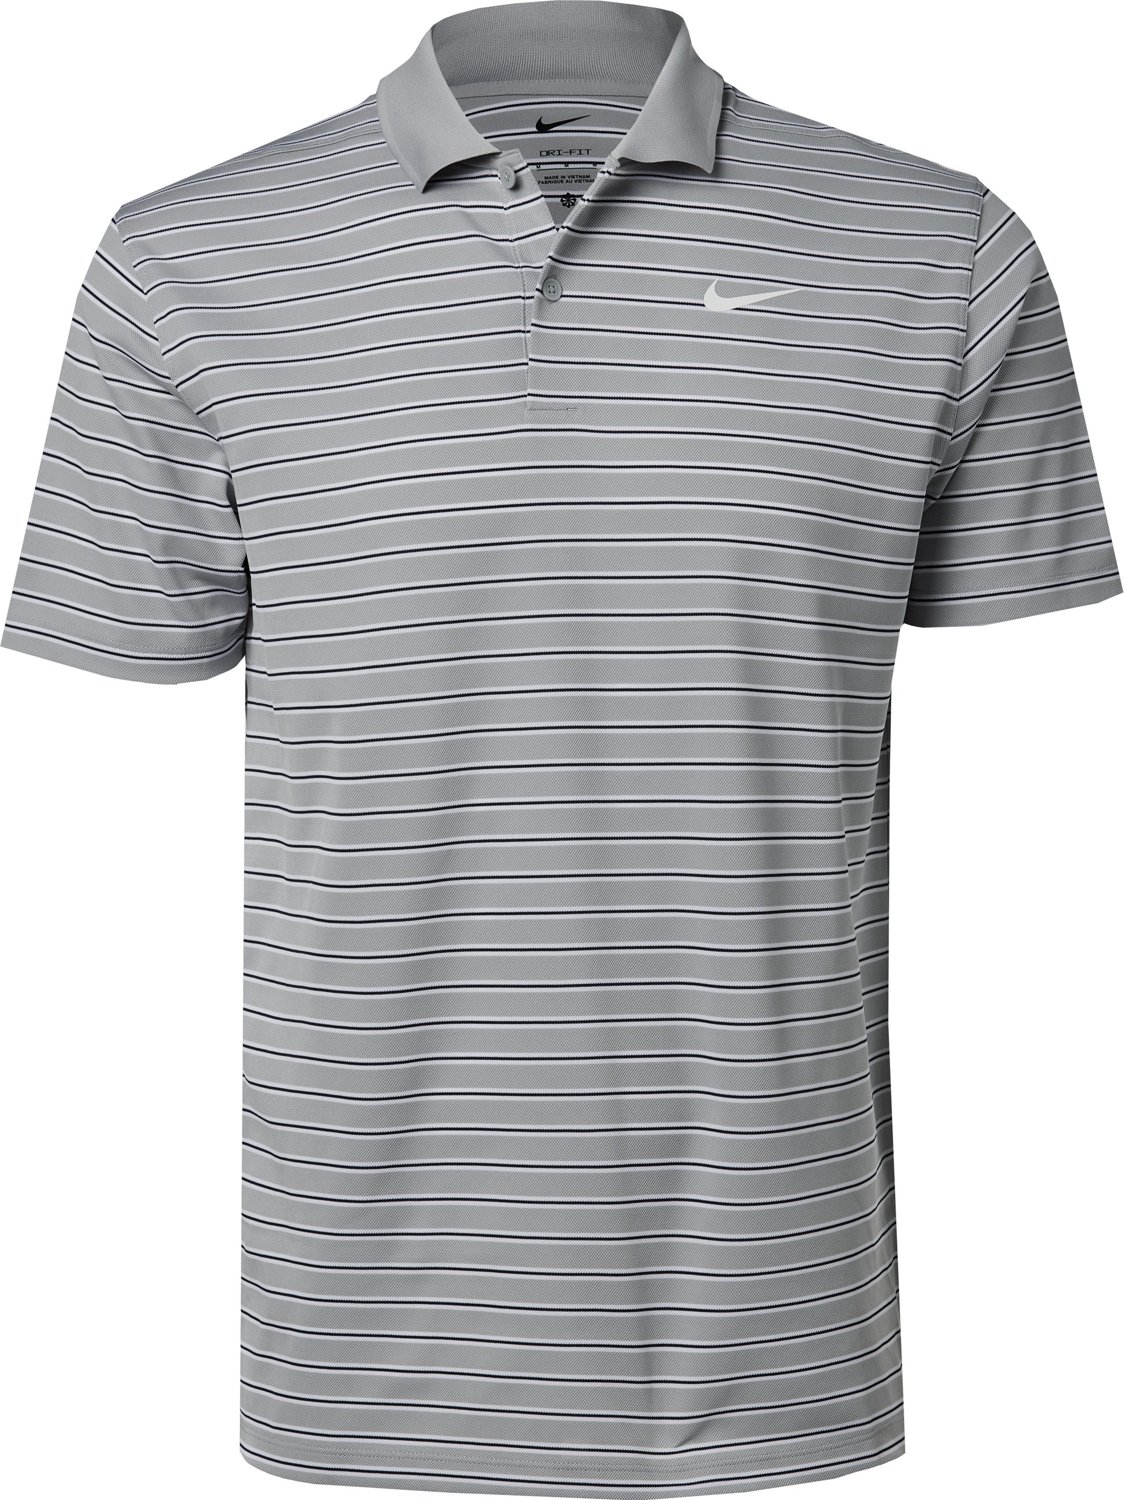 Nike Dri-FIT Victory Striped (MLB St. Louis Cardinals) Men's Polo.